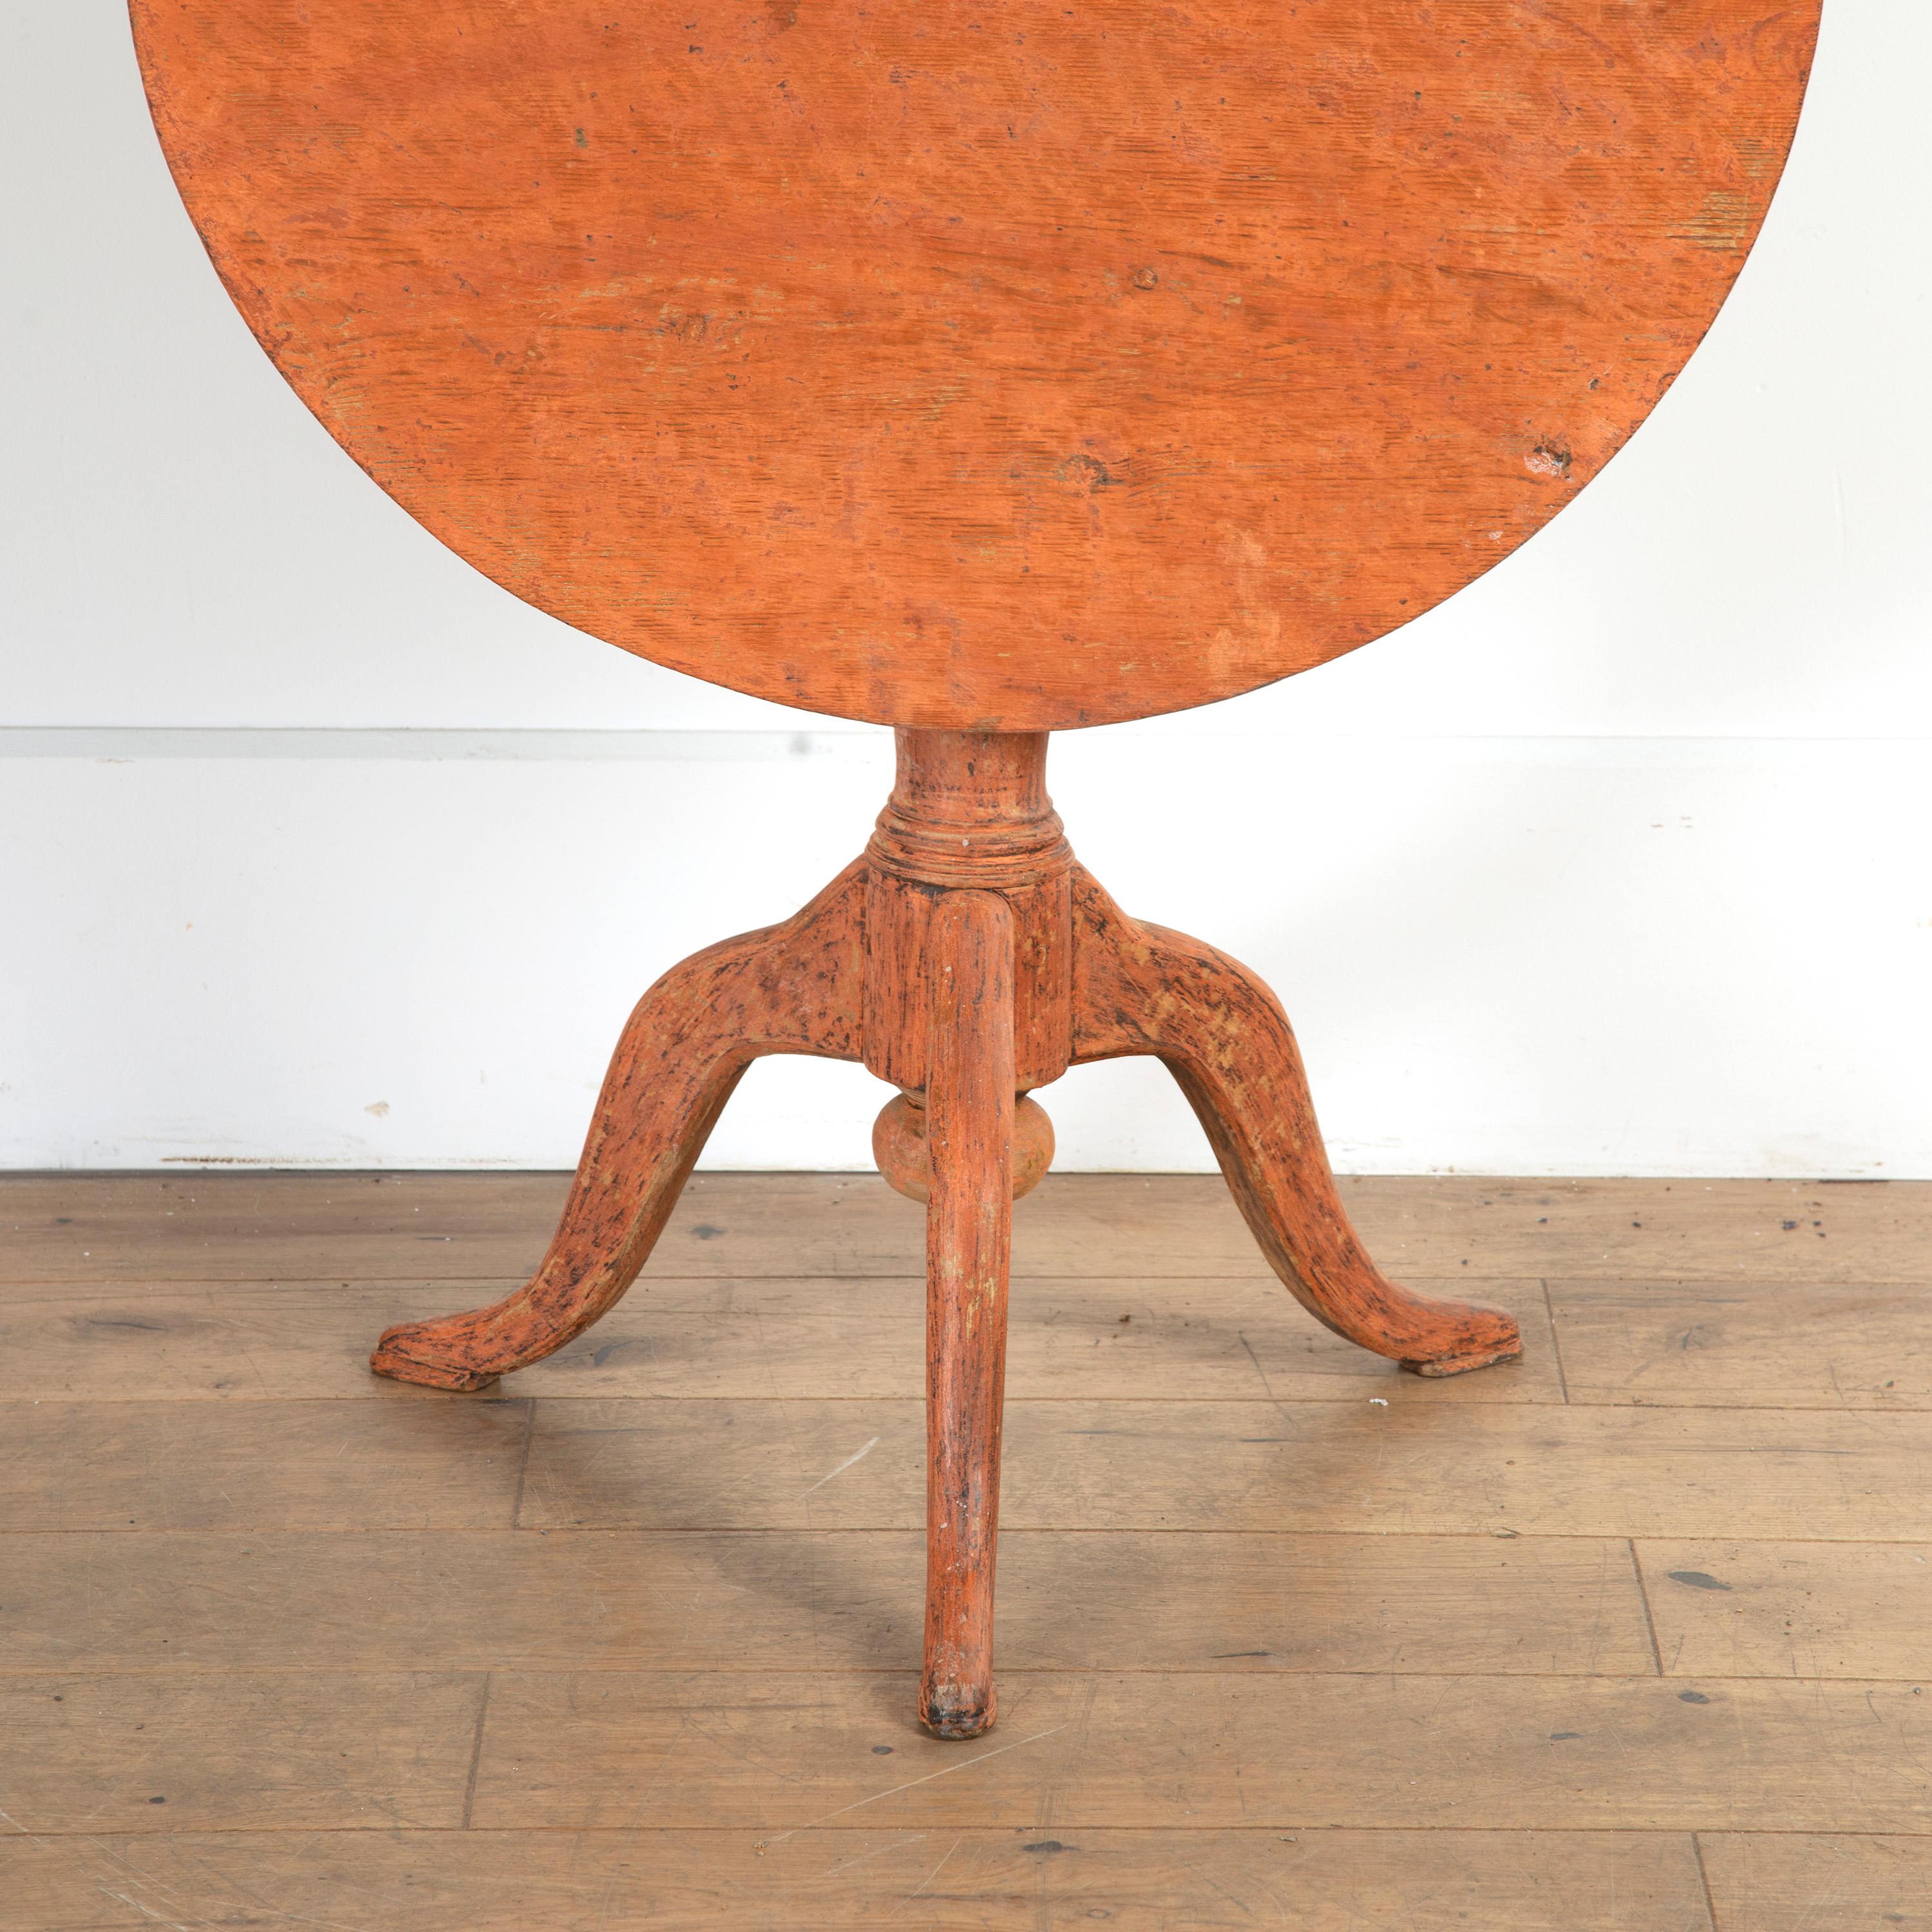 Lovely Swedish rococo period tilt-top table.

This lovely table is in its original condition and dates to the 18th Century. The whole rests on a rusty orange tripod base with cabriole legs and petite feet. 

Its tilt-top, top is in a functional